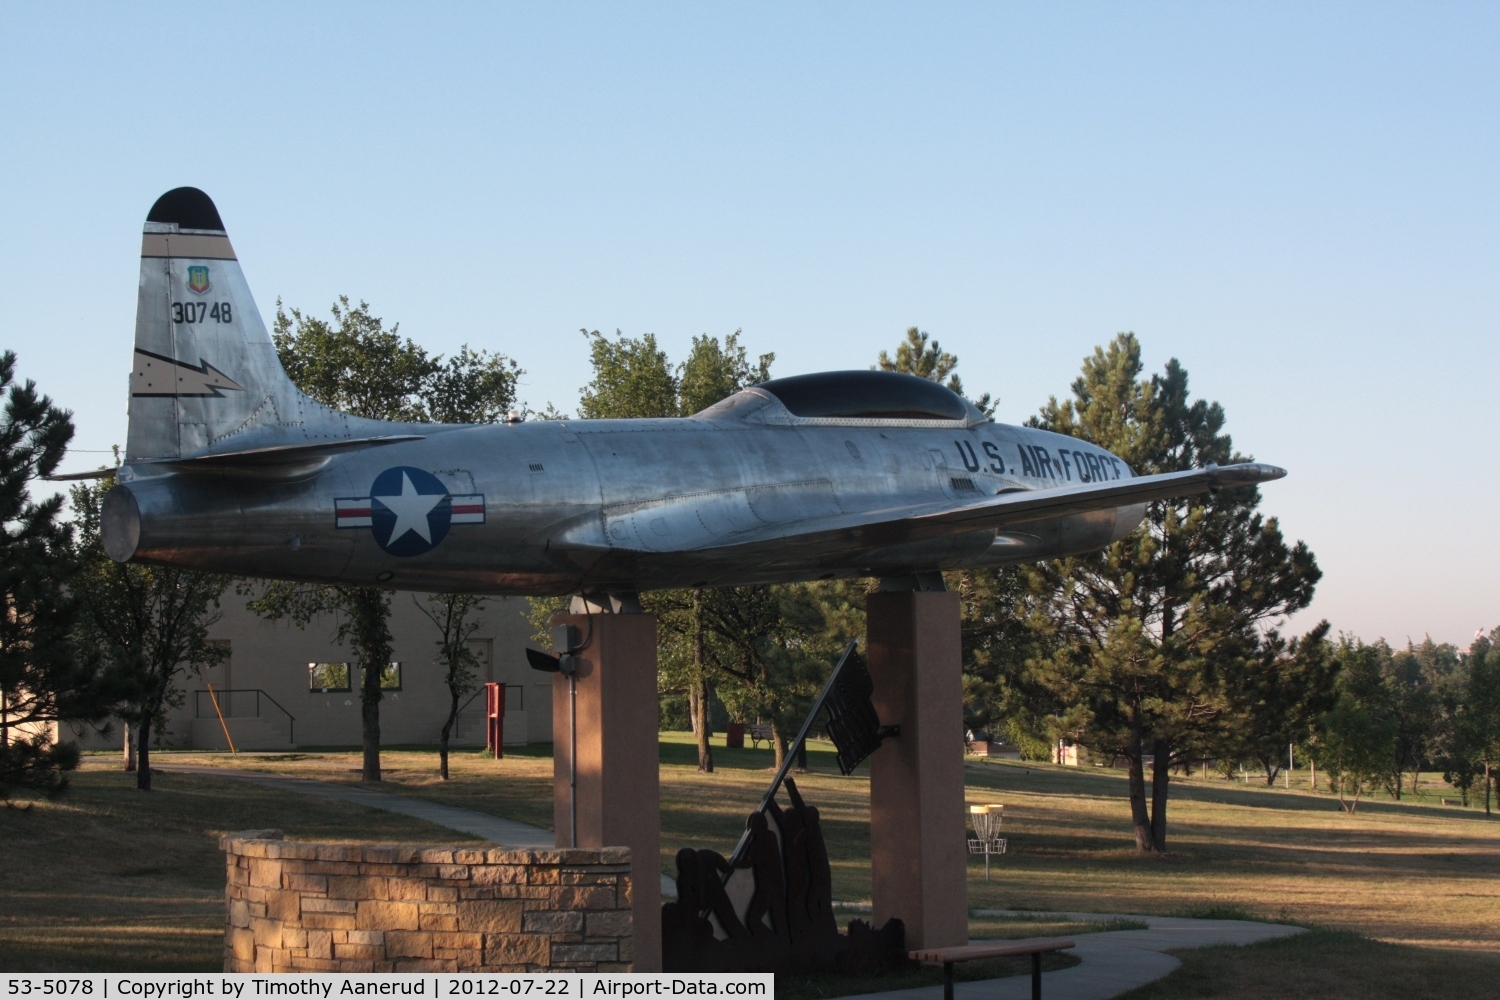 53-5078, 1953 Lockheed T-33A-1-LO Shooting Star C/N 580-8417, Lockheed T-33A-1-LO, c/n 580-8417.  Young's Park, Veterans Memorial, south side of West 9th Street, between 5th Ave West 7th Ave West.